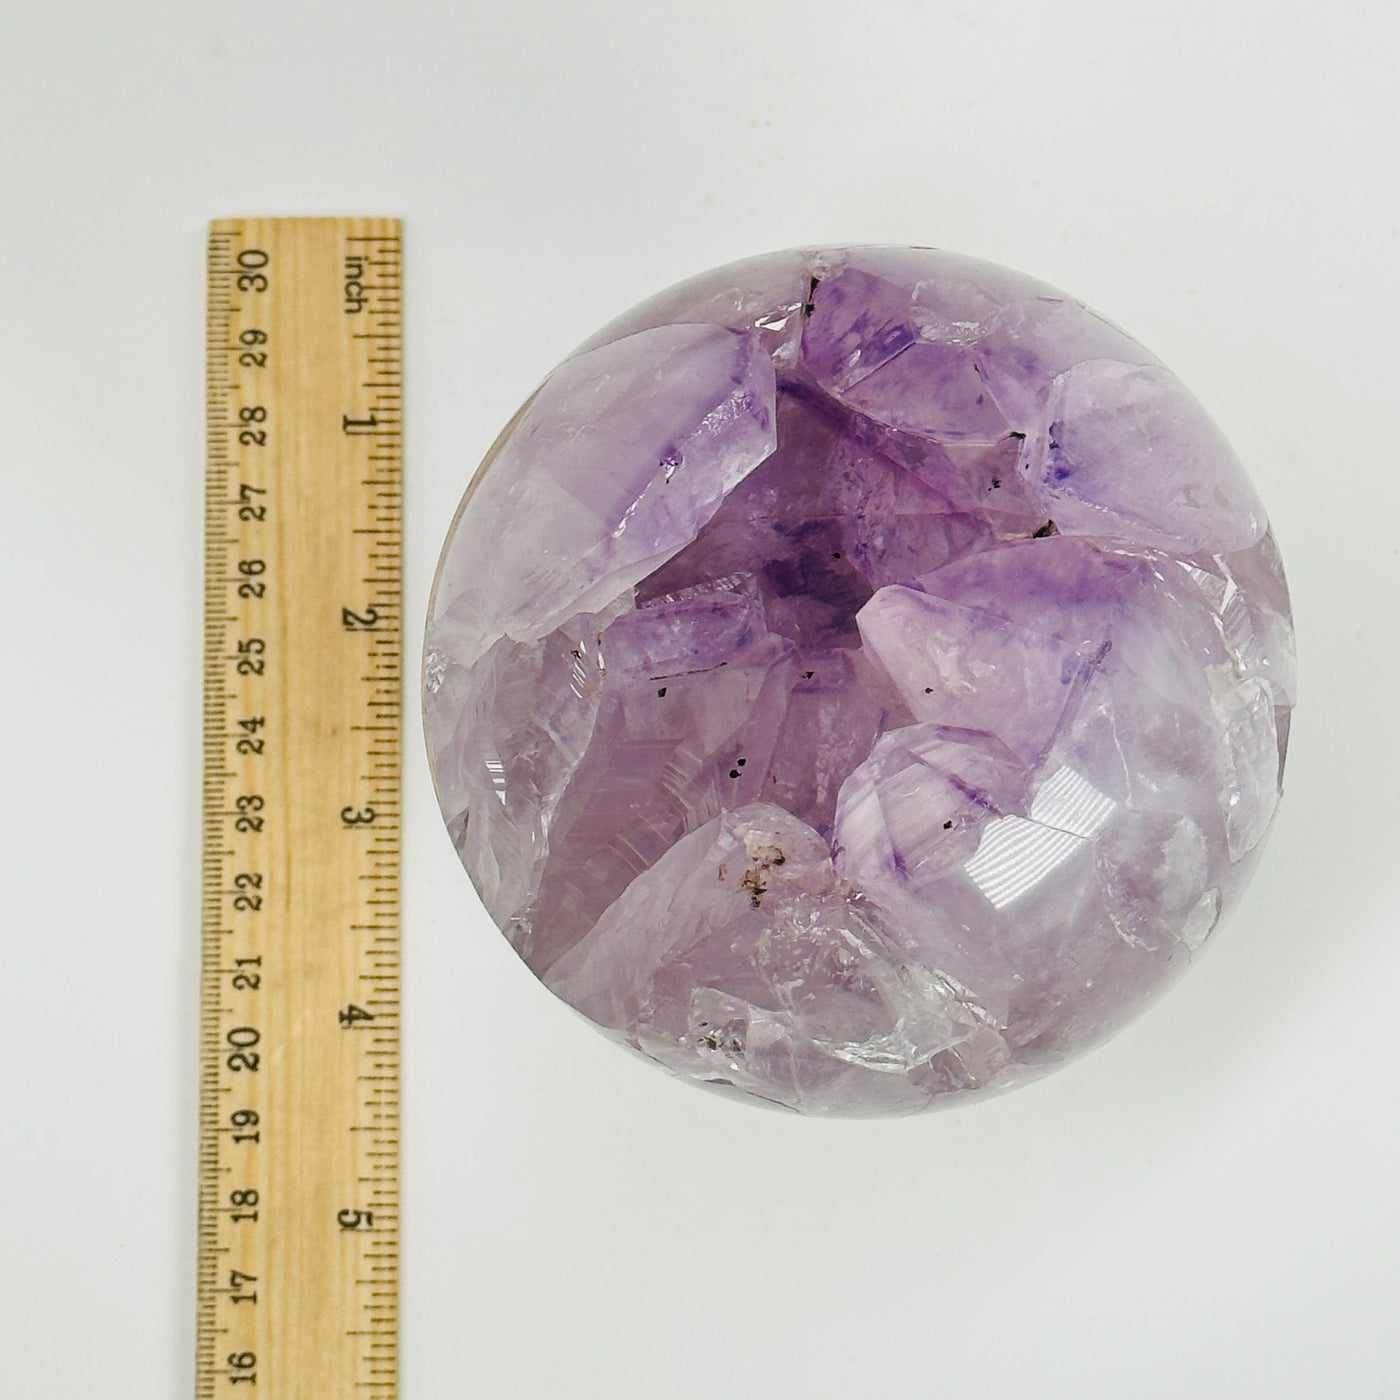 amethyst sphere next to a ruler for size reference